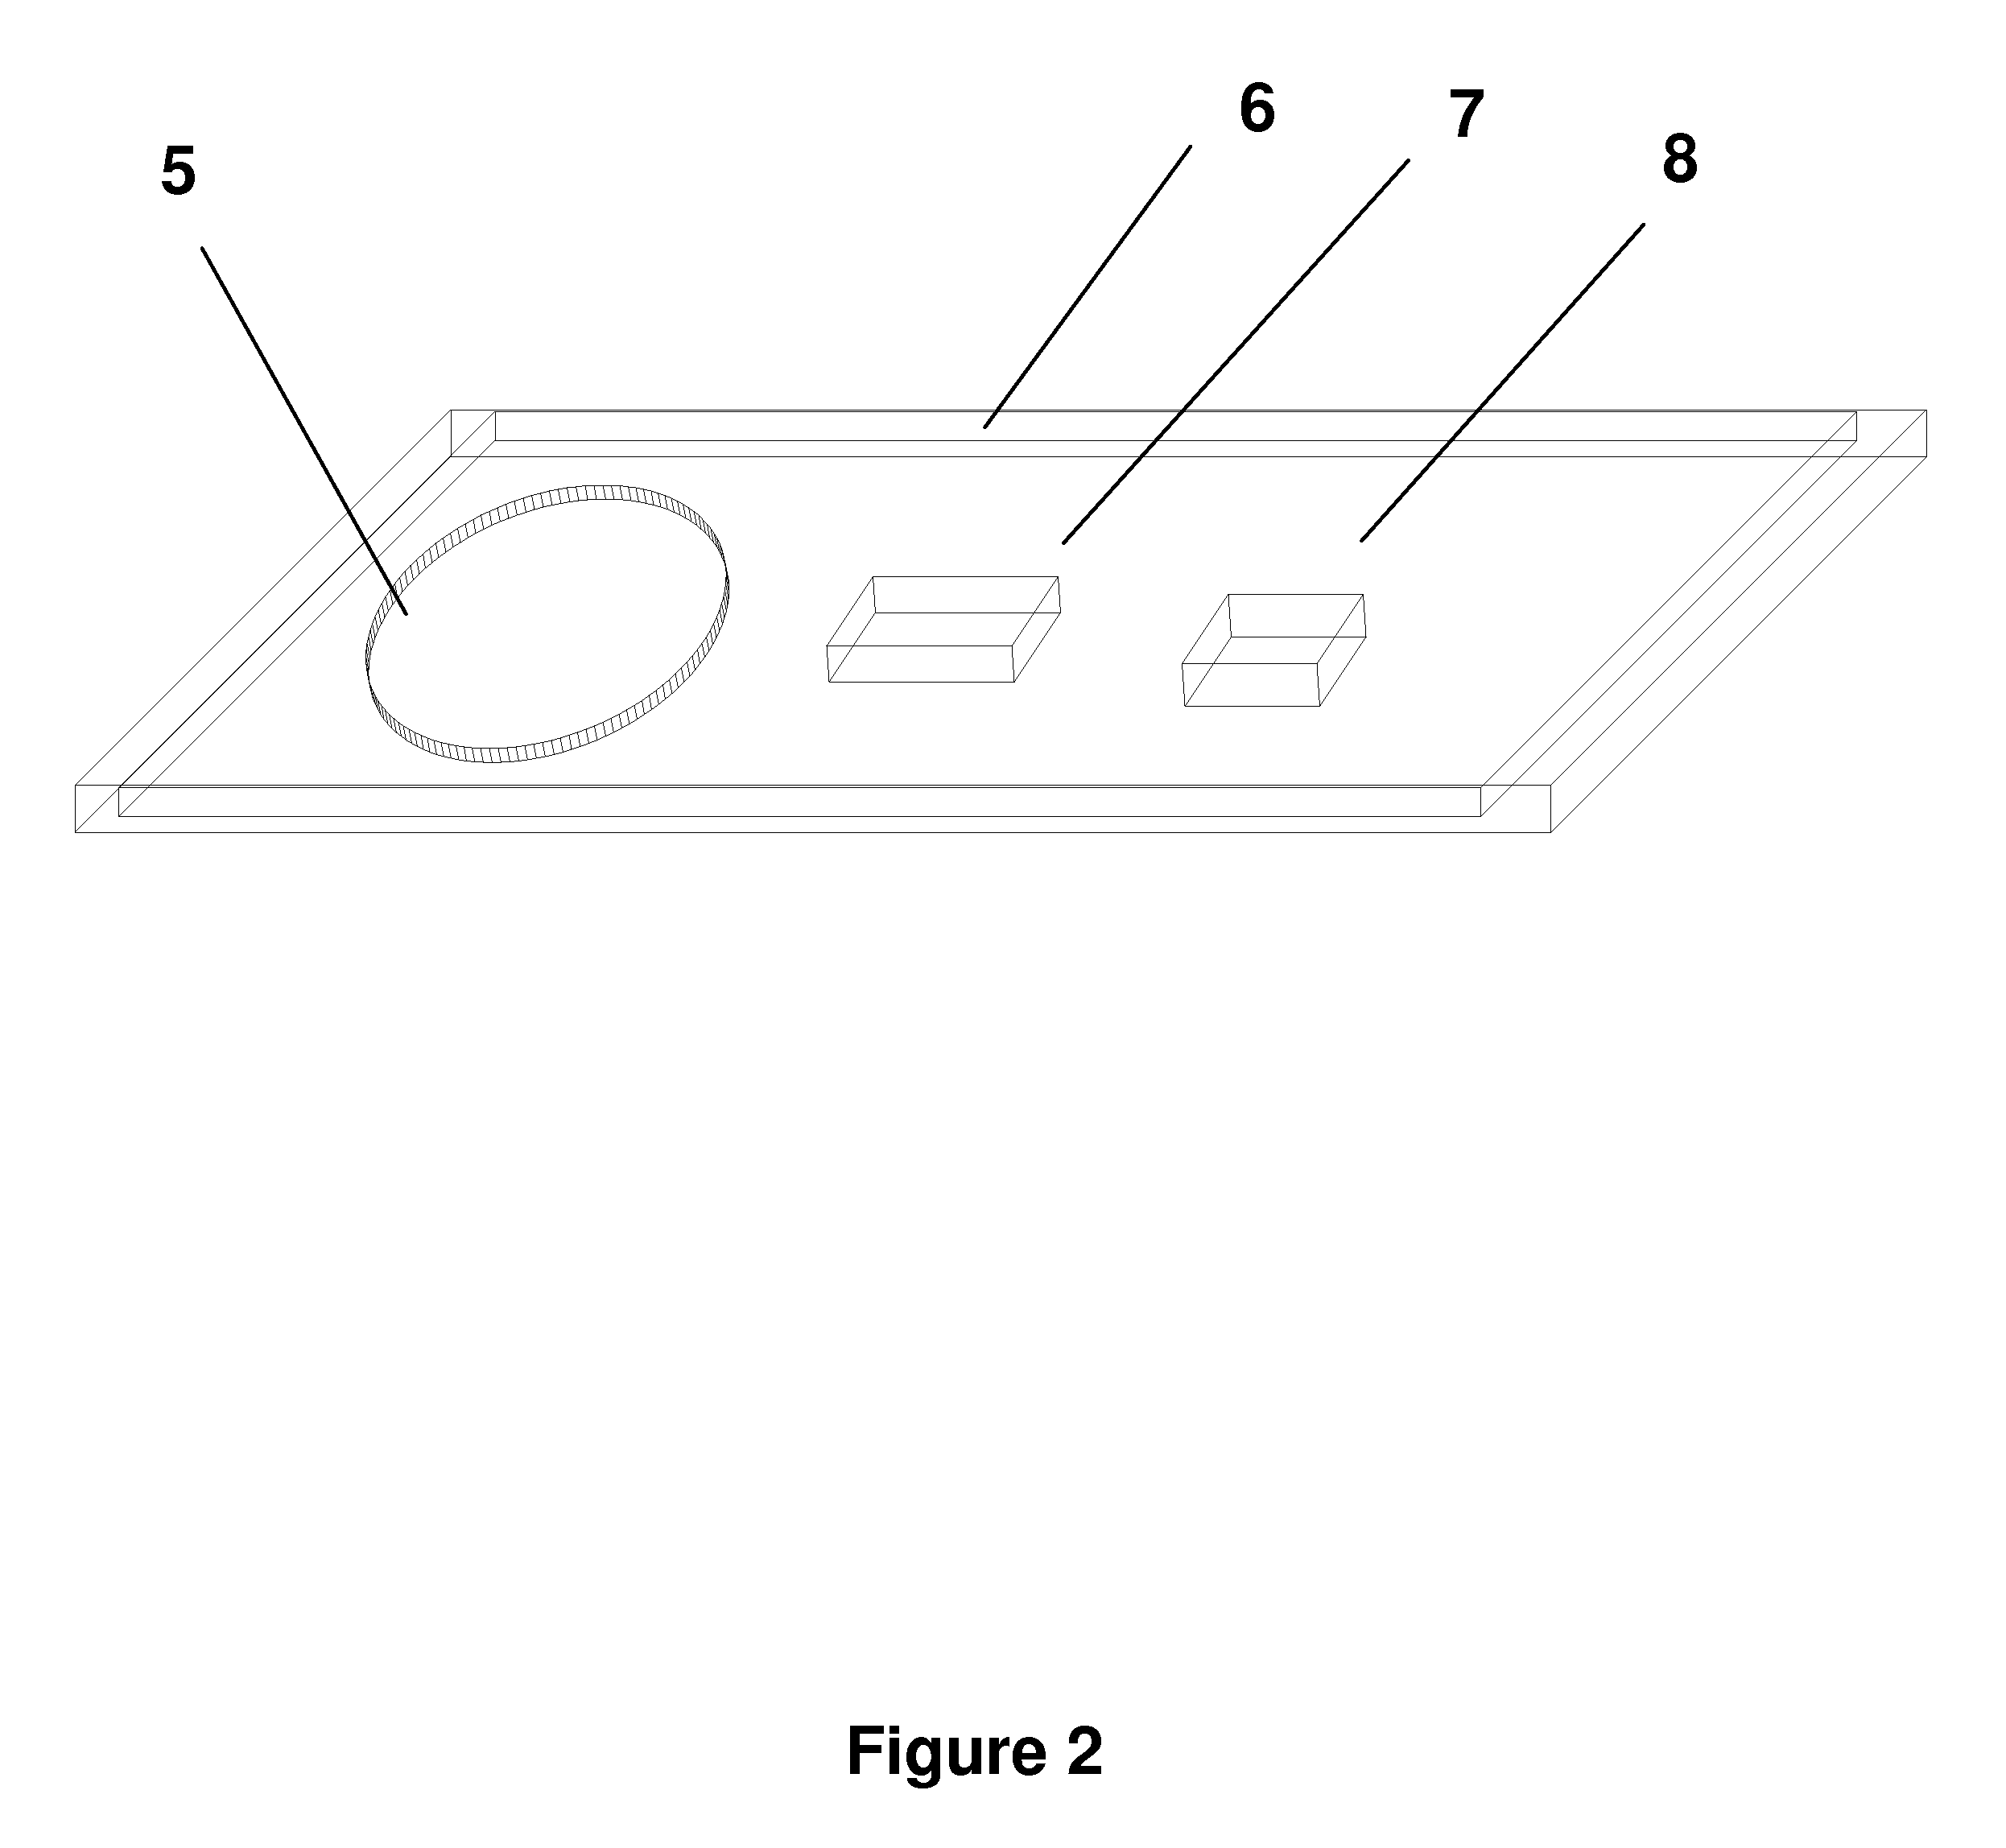 Low-frequency radio tag encapsulating system